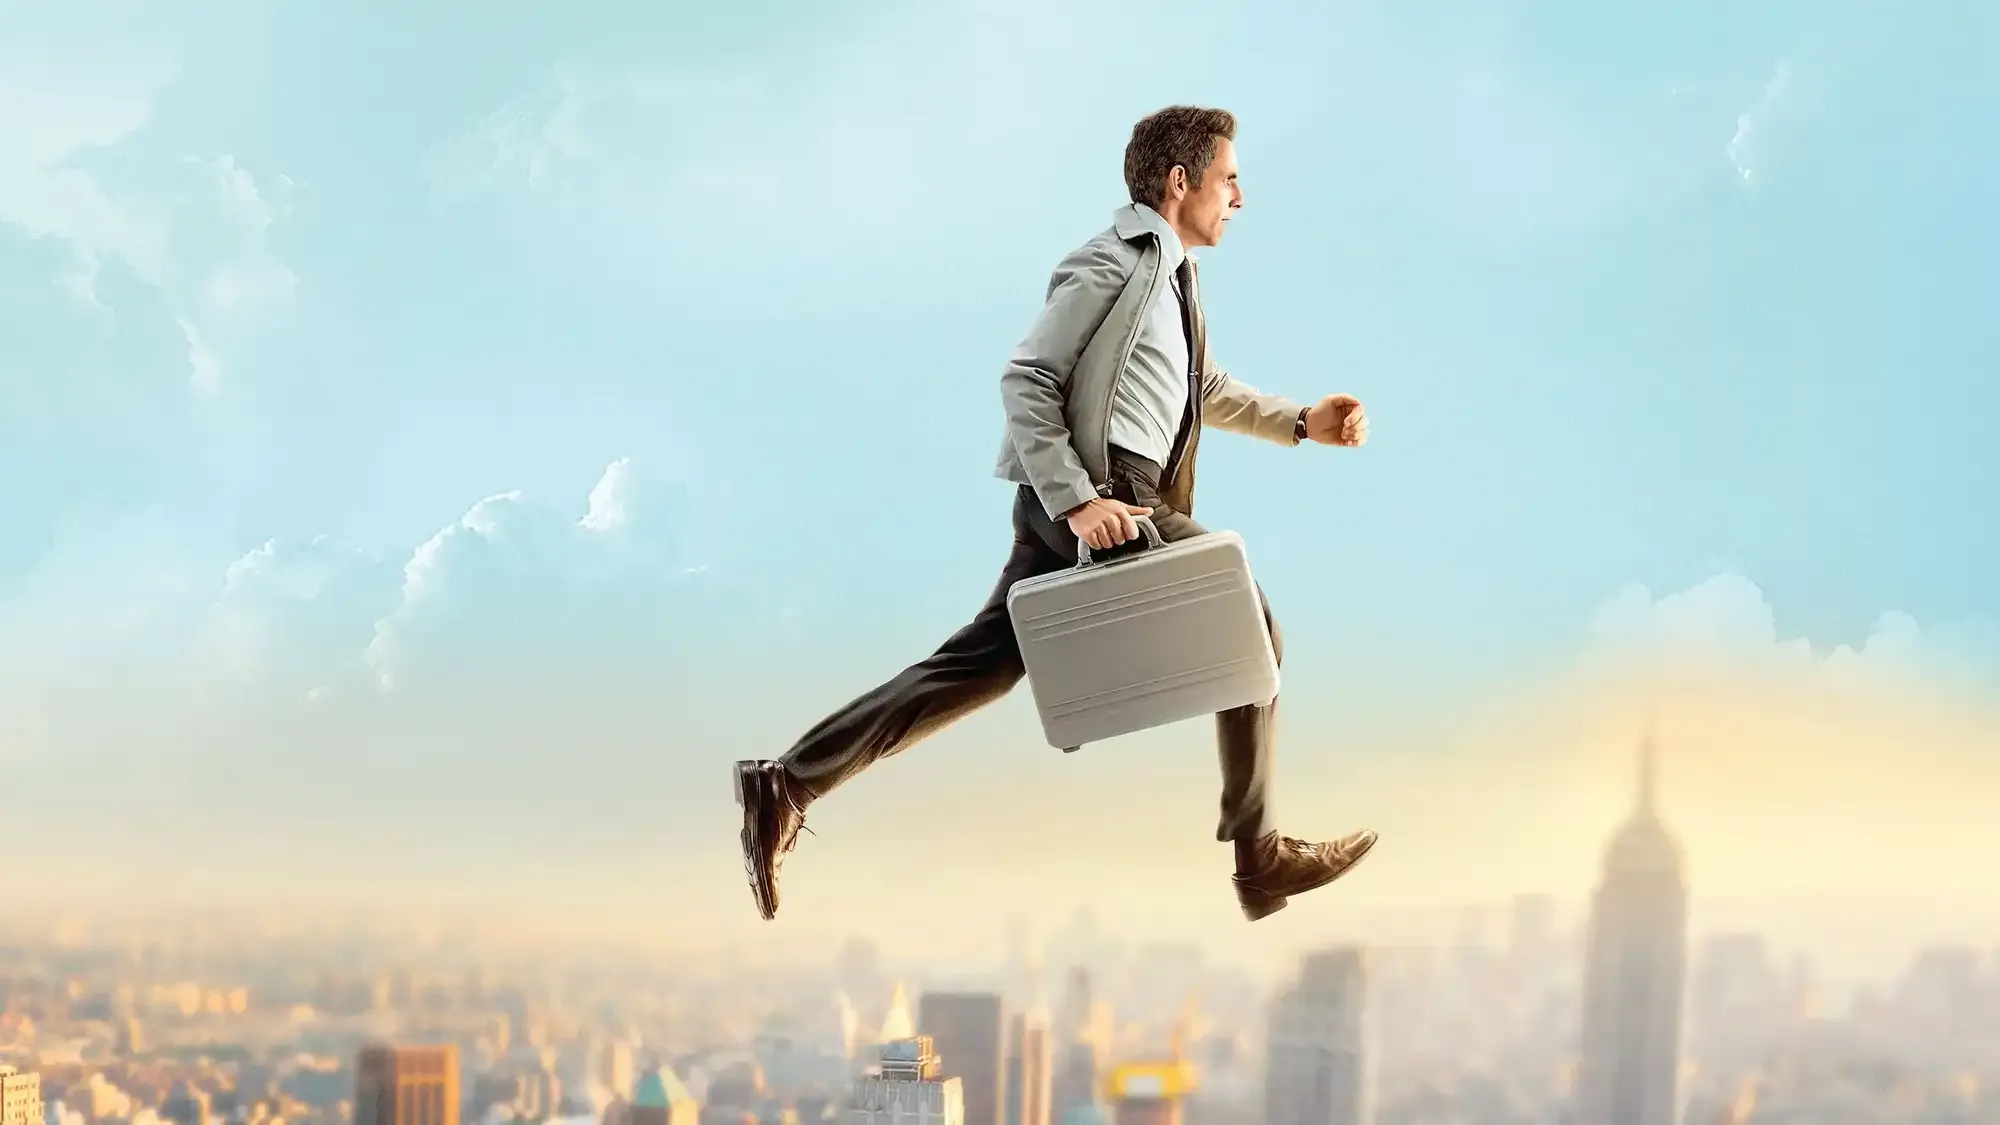 The Secret Life of Walter Mitty movie review